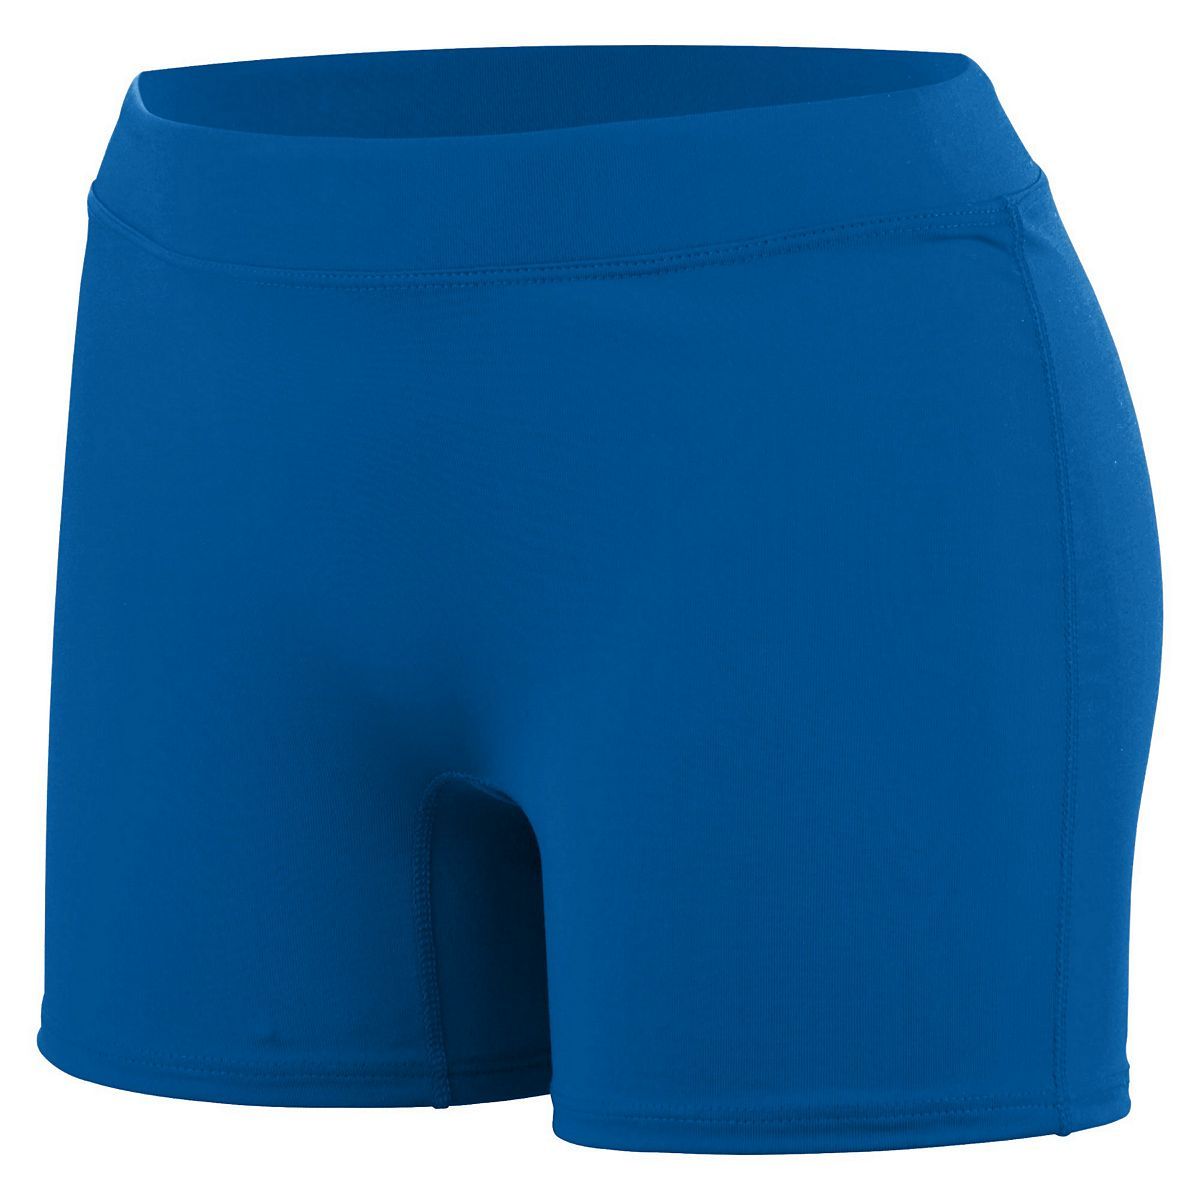 High 5 Girls Knock Out Shorts in Royal  -Part of the Girls, High5-Products, Volleyball, Girls-Shorts product lines at KanaleyCreations.com